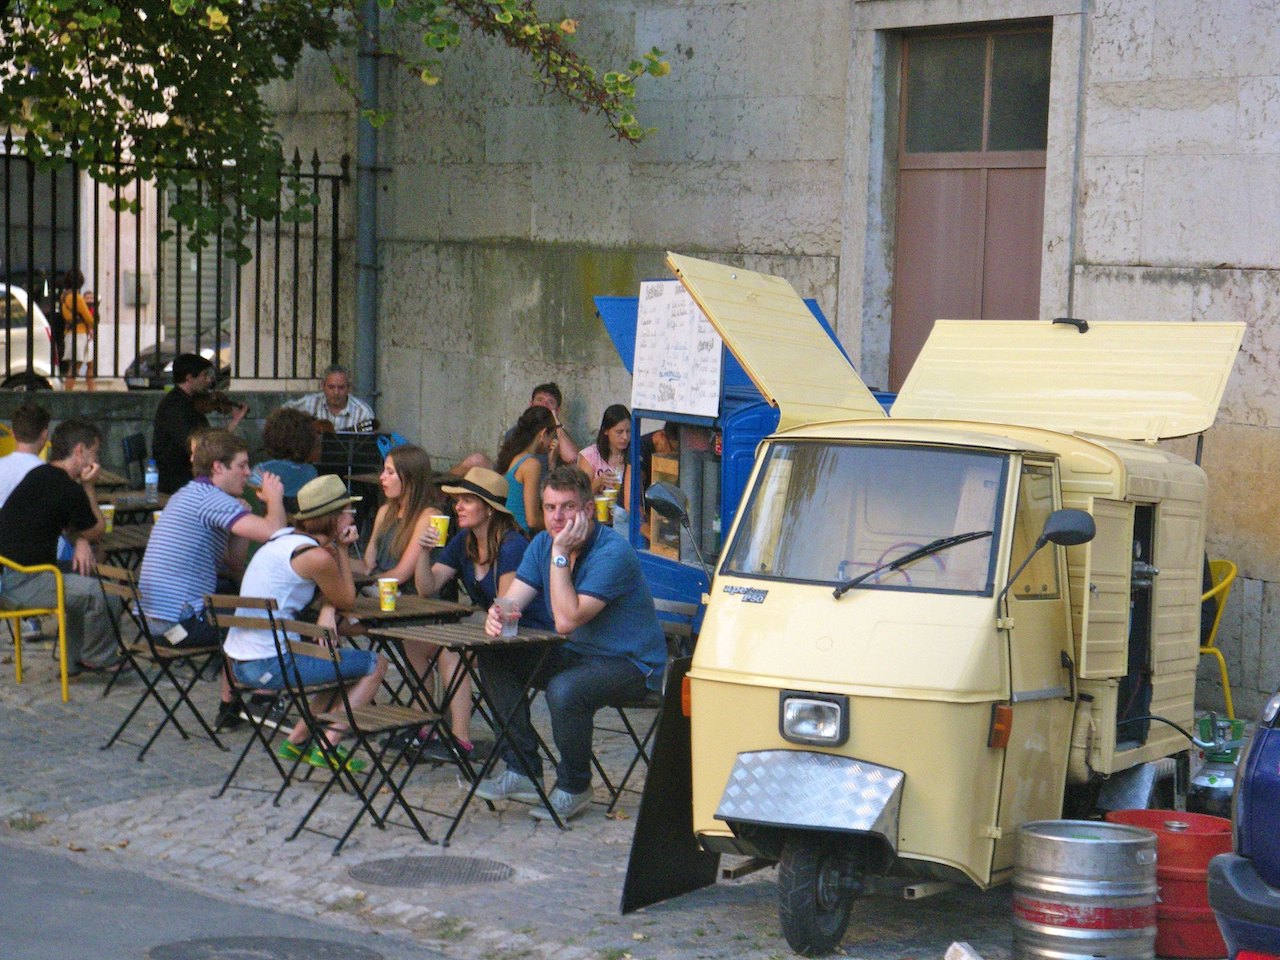 Food truck scene with outdoor diners in Lisbon, Portugal